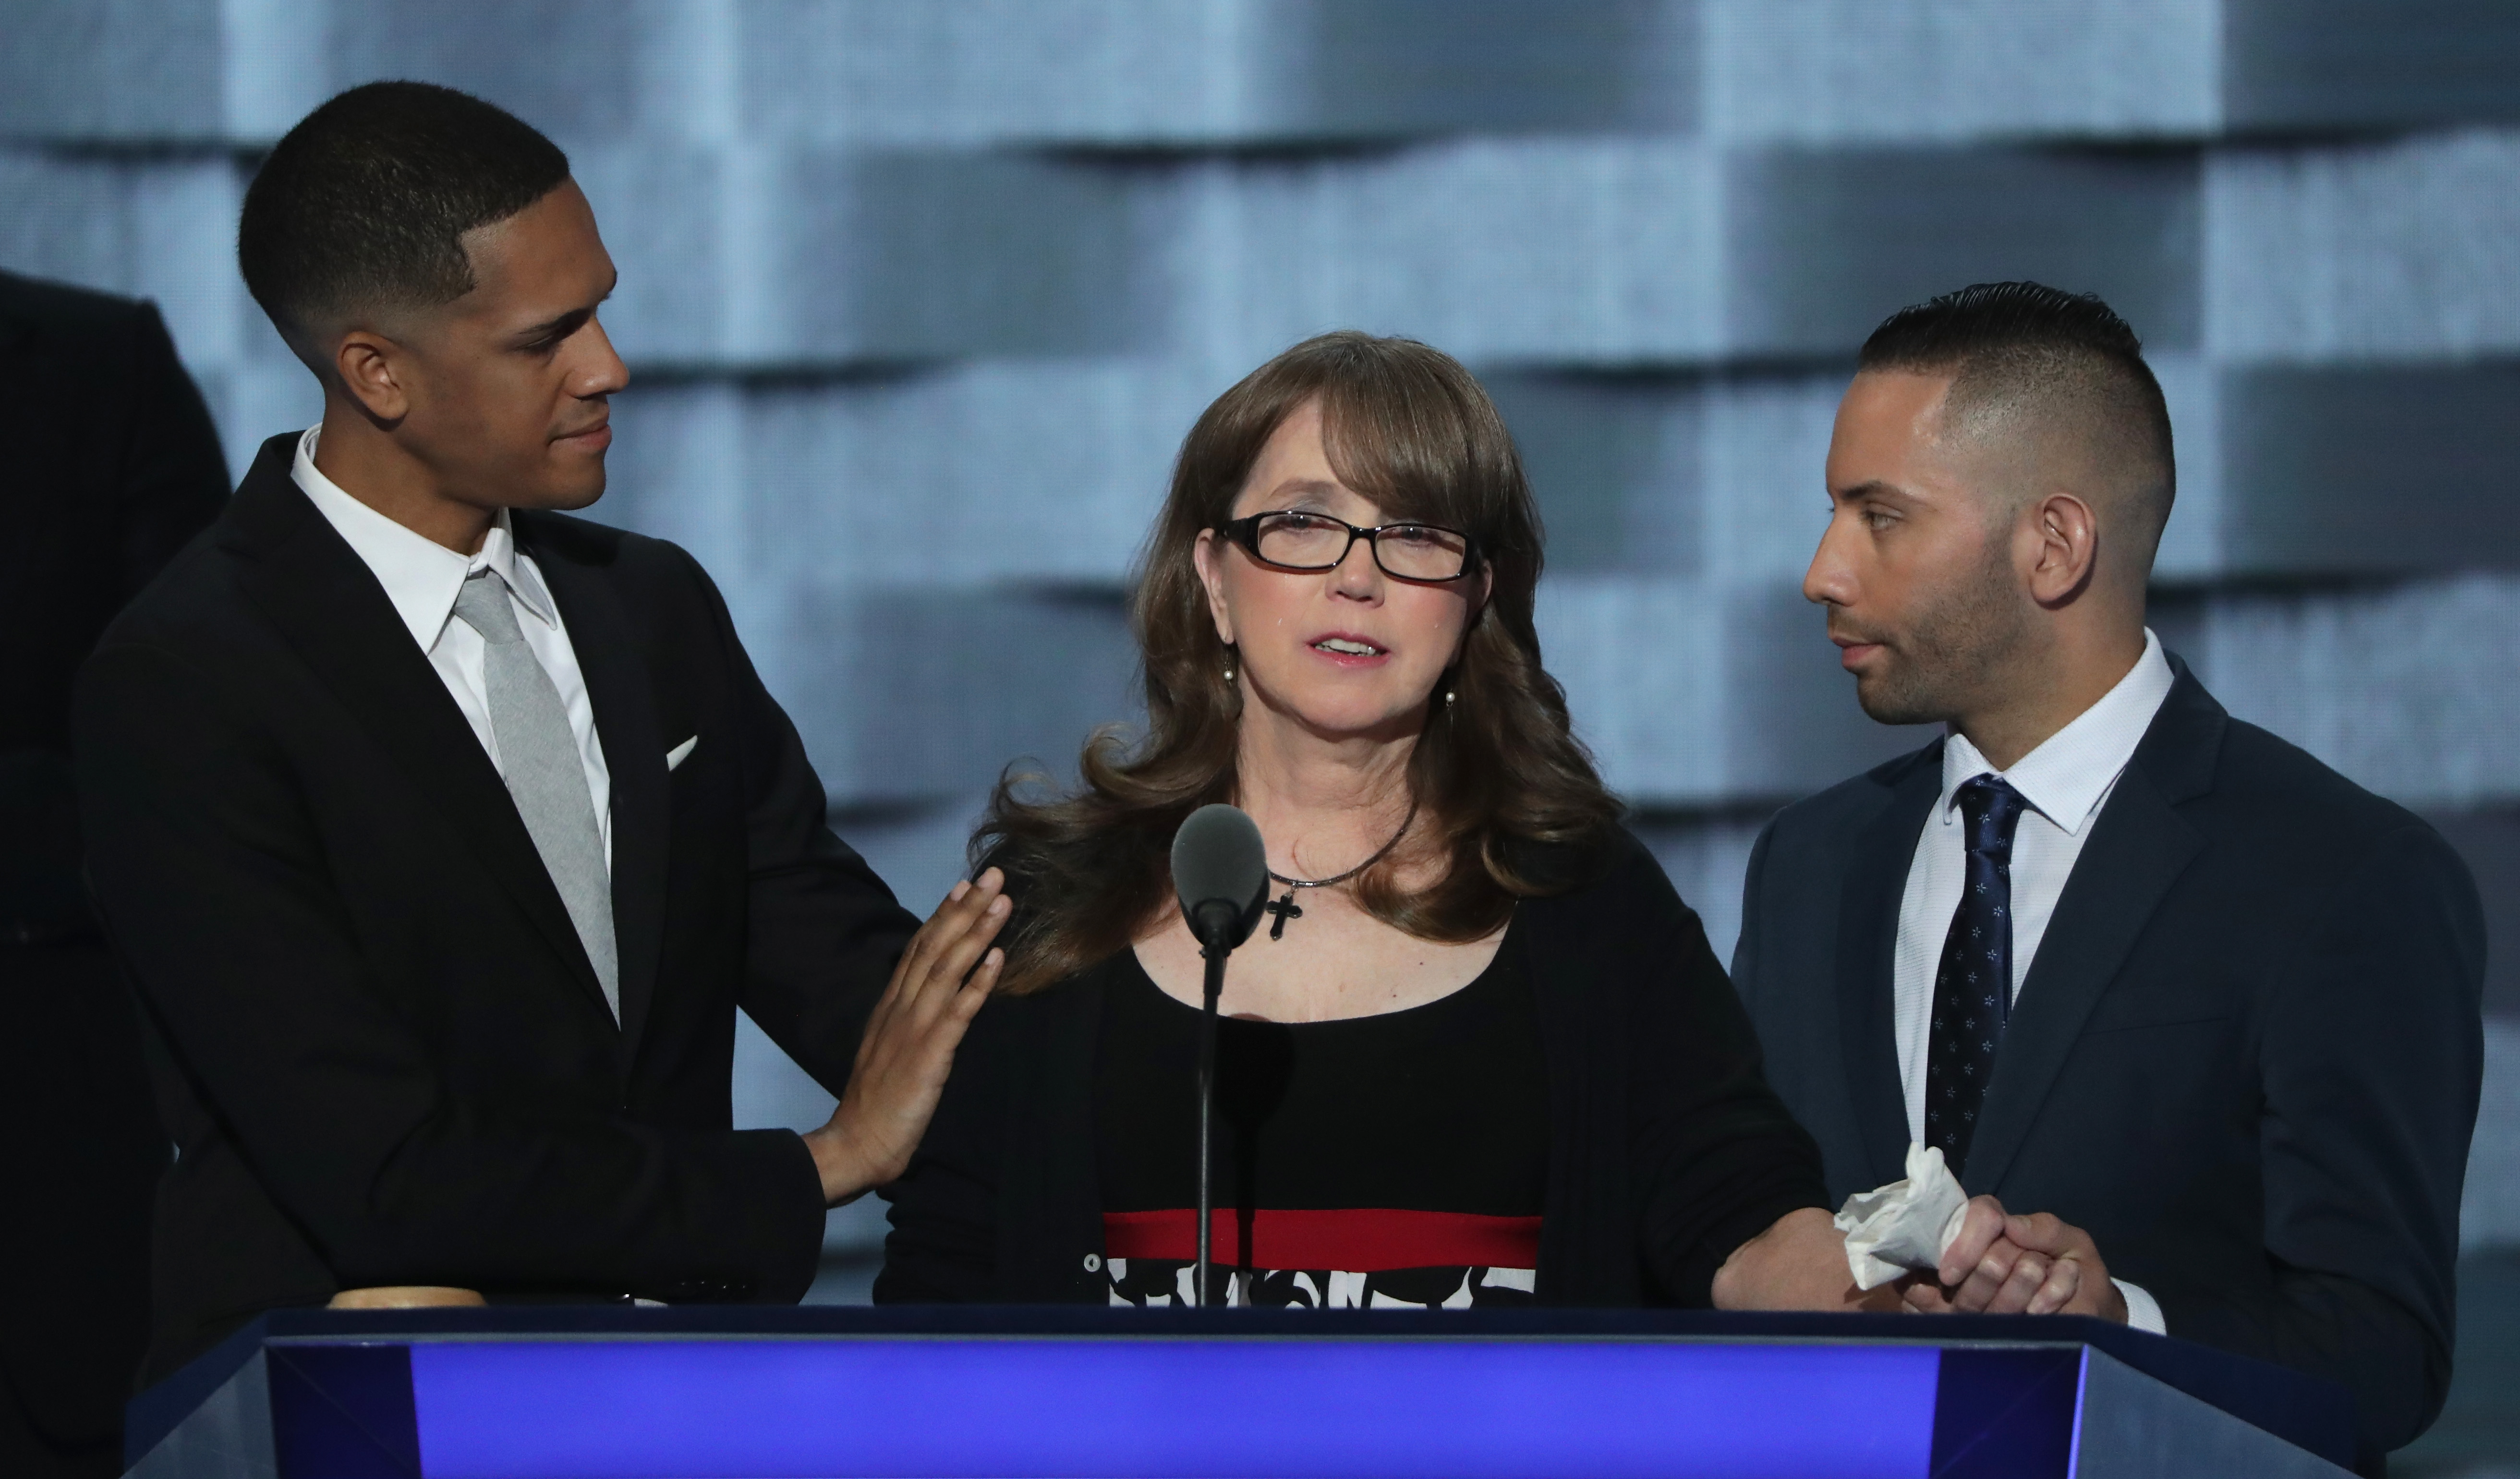 PHILADELPHIA, PA - JULY 27: Christine Leinonen, mother of Christopher 'Dru' Leinonen, is comforted by Brandon Wolf (L) and Jose Arriagada (R), survivors of the attack at the Pulse nightclub in Orlando, as they stand on stage during the third day of the Democratic National Convention at the Wells Fargo Center, July 27, 2016 in Philadelphia, Pennsylvania. Democratic presidential candidate Hillary Clinton received the number of votes needed to secure the party's nomination. An estimated 50,000 people are expected in Philadelphia, including hundreds of protesters and members of the media. The four-day Democratic National Convention kicked off July 25.   Alex Wong/Getty Images/AFP